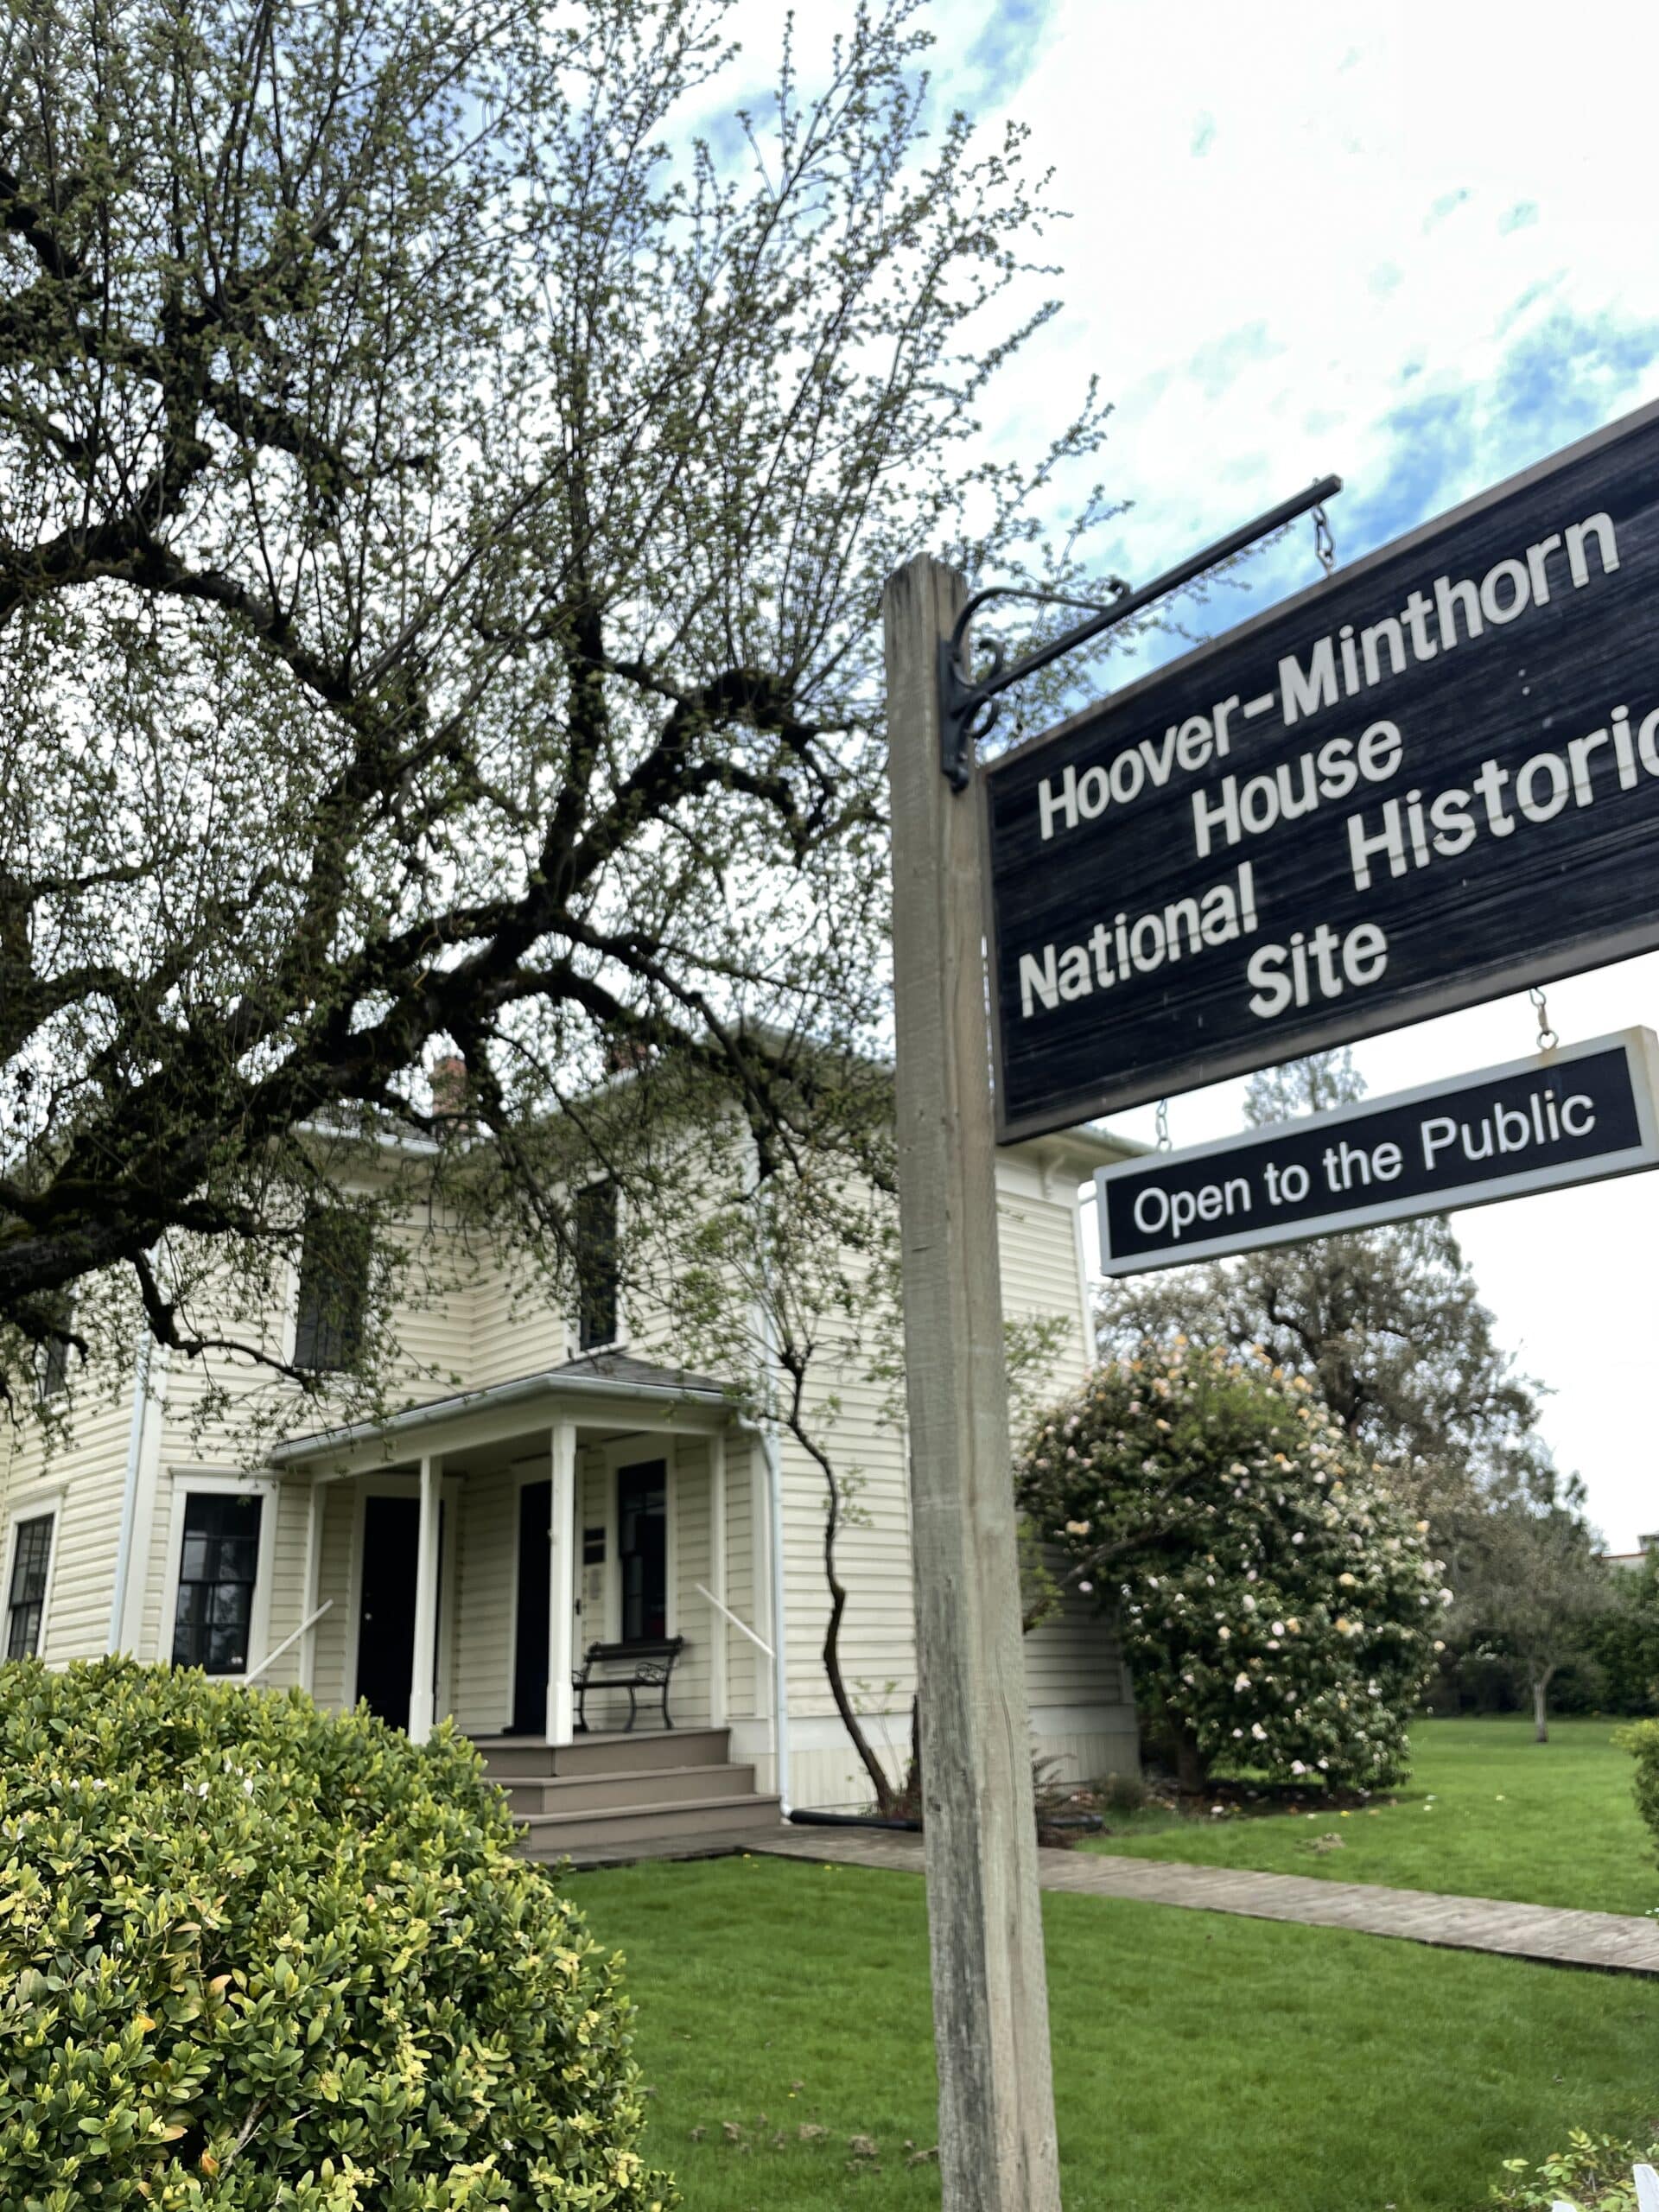 Hoover-Minthorn House and marker